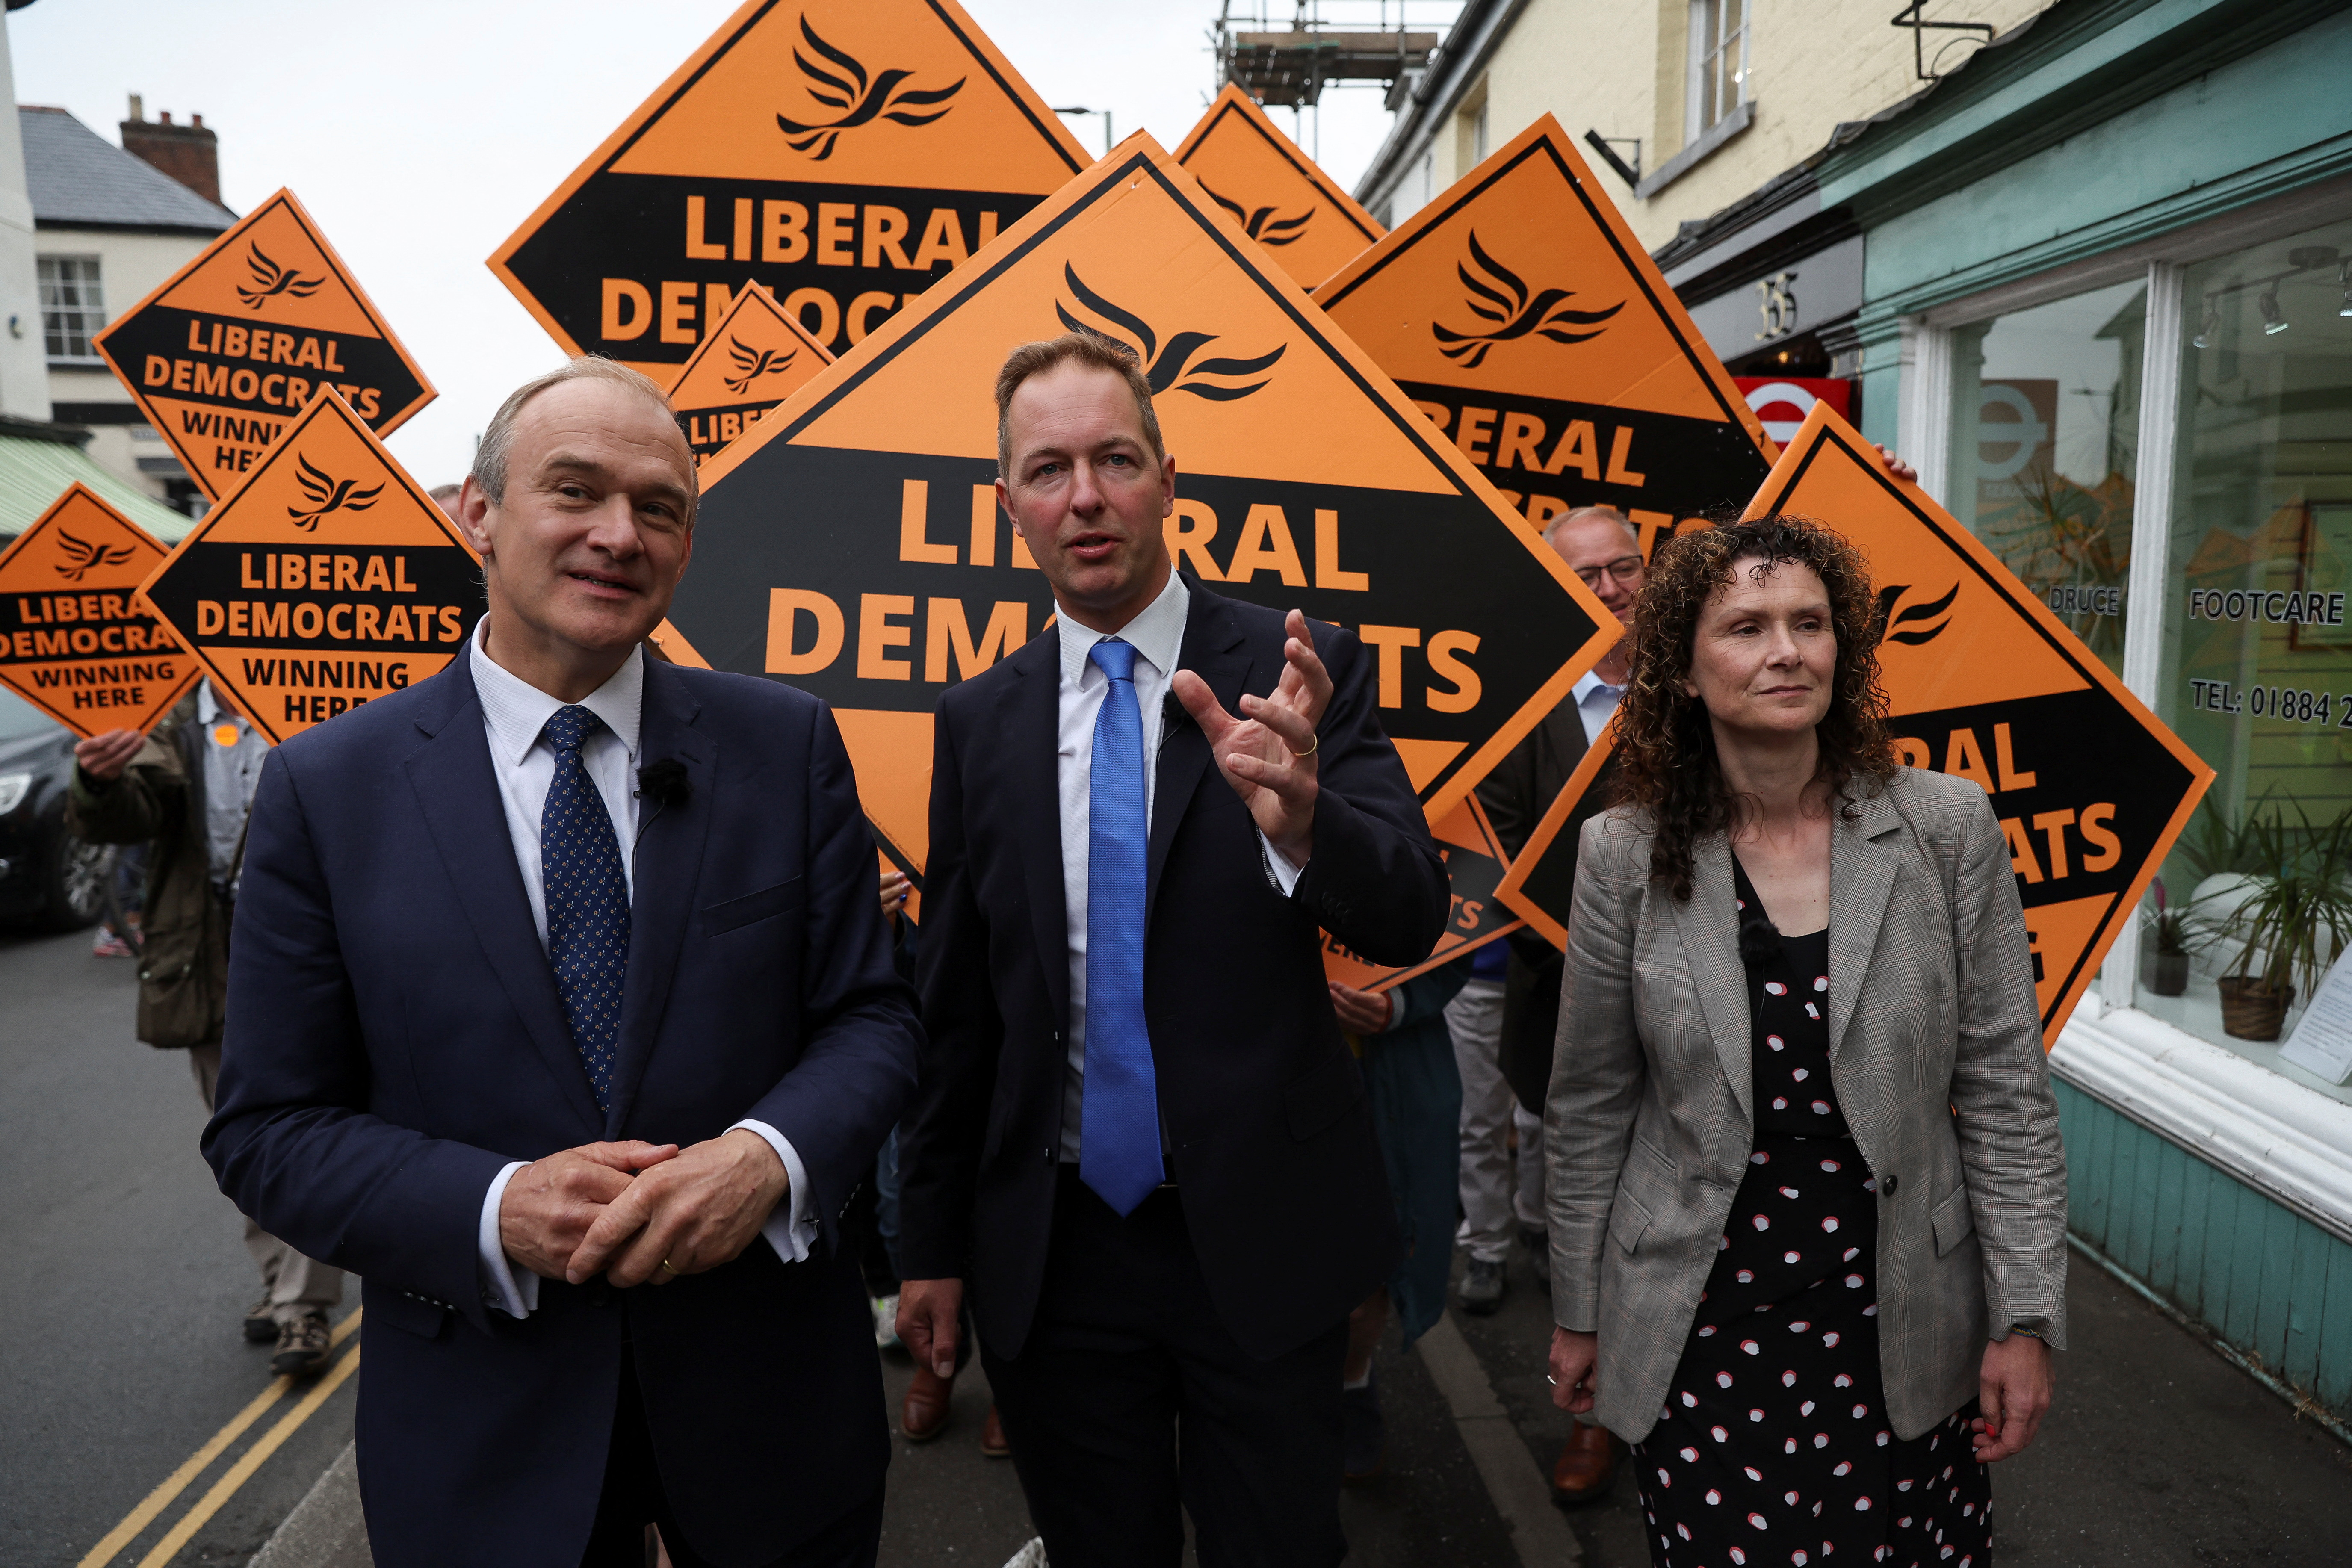 Liberal Democrats party candidate Richard Foord holds a victory rally in Tiverton